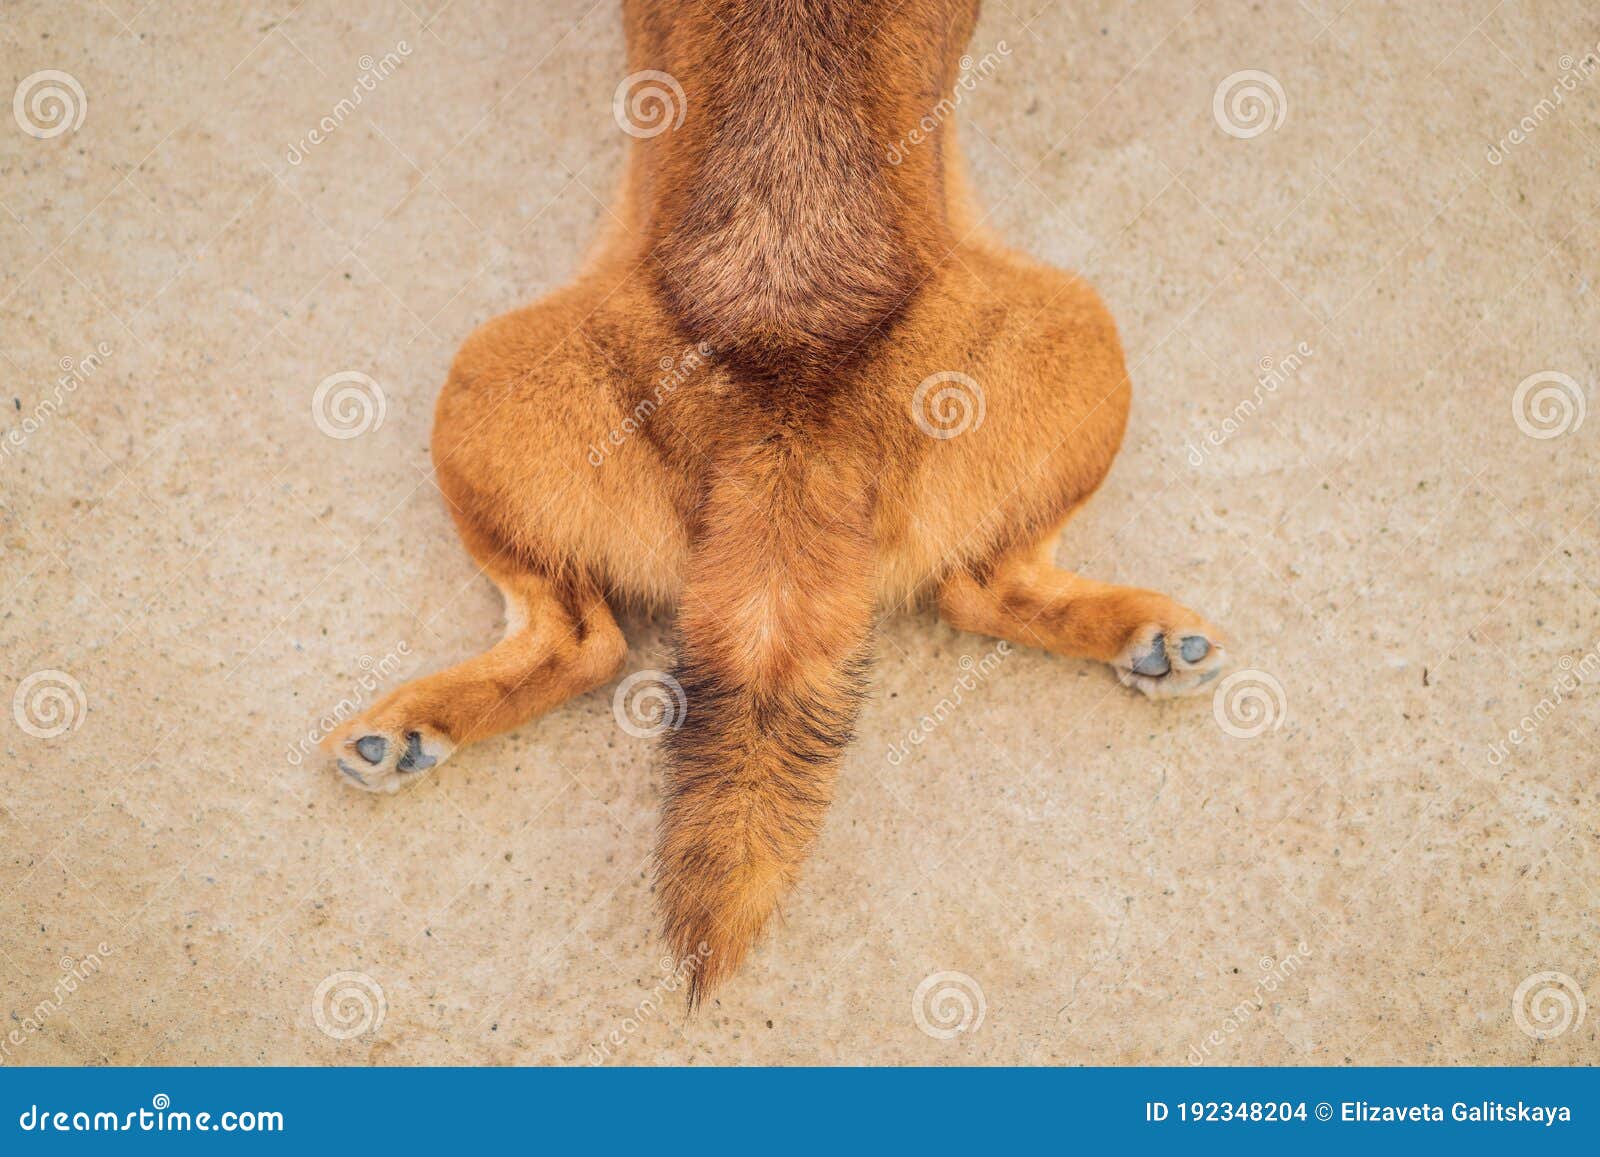 The Dog Lies with Outstretched Hind Legs. Hot Dog Stock Photo - Image of  corgi, hind: 192348204